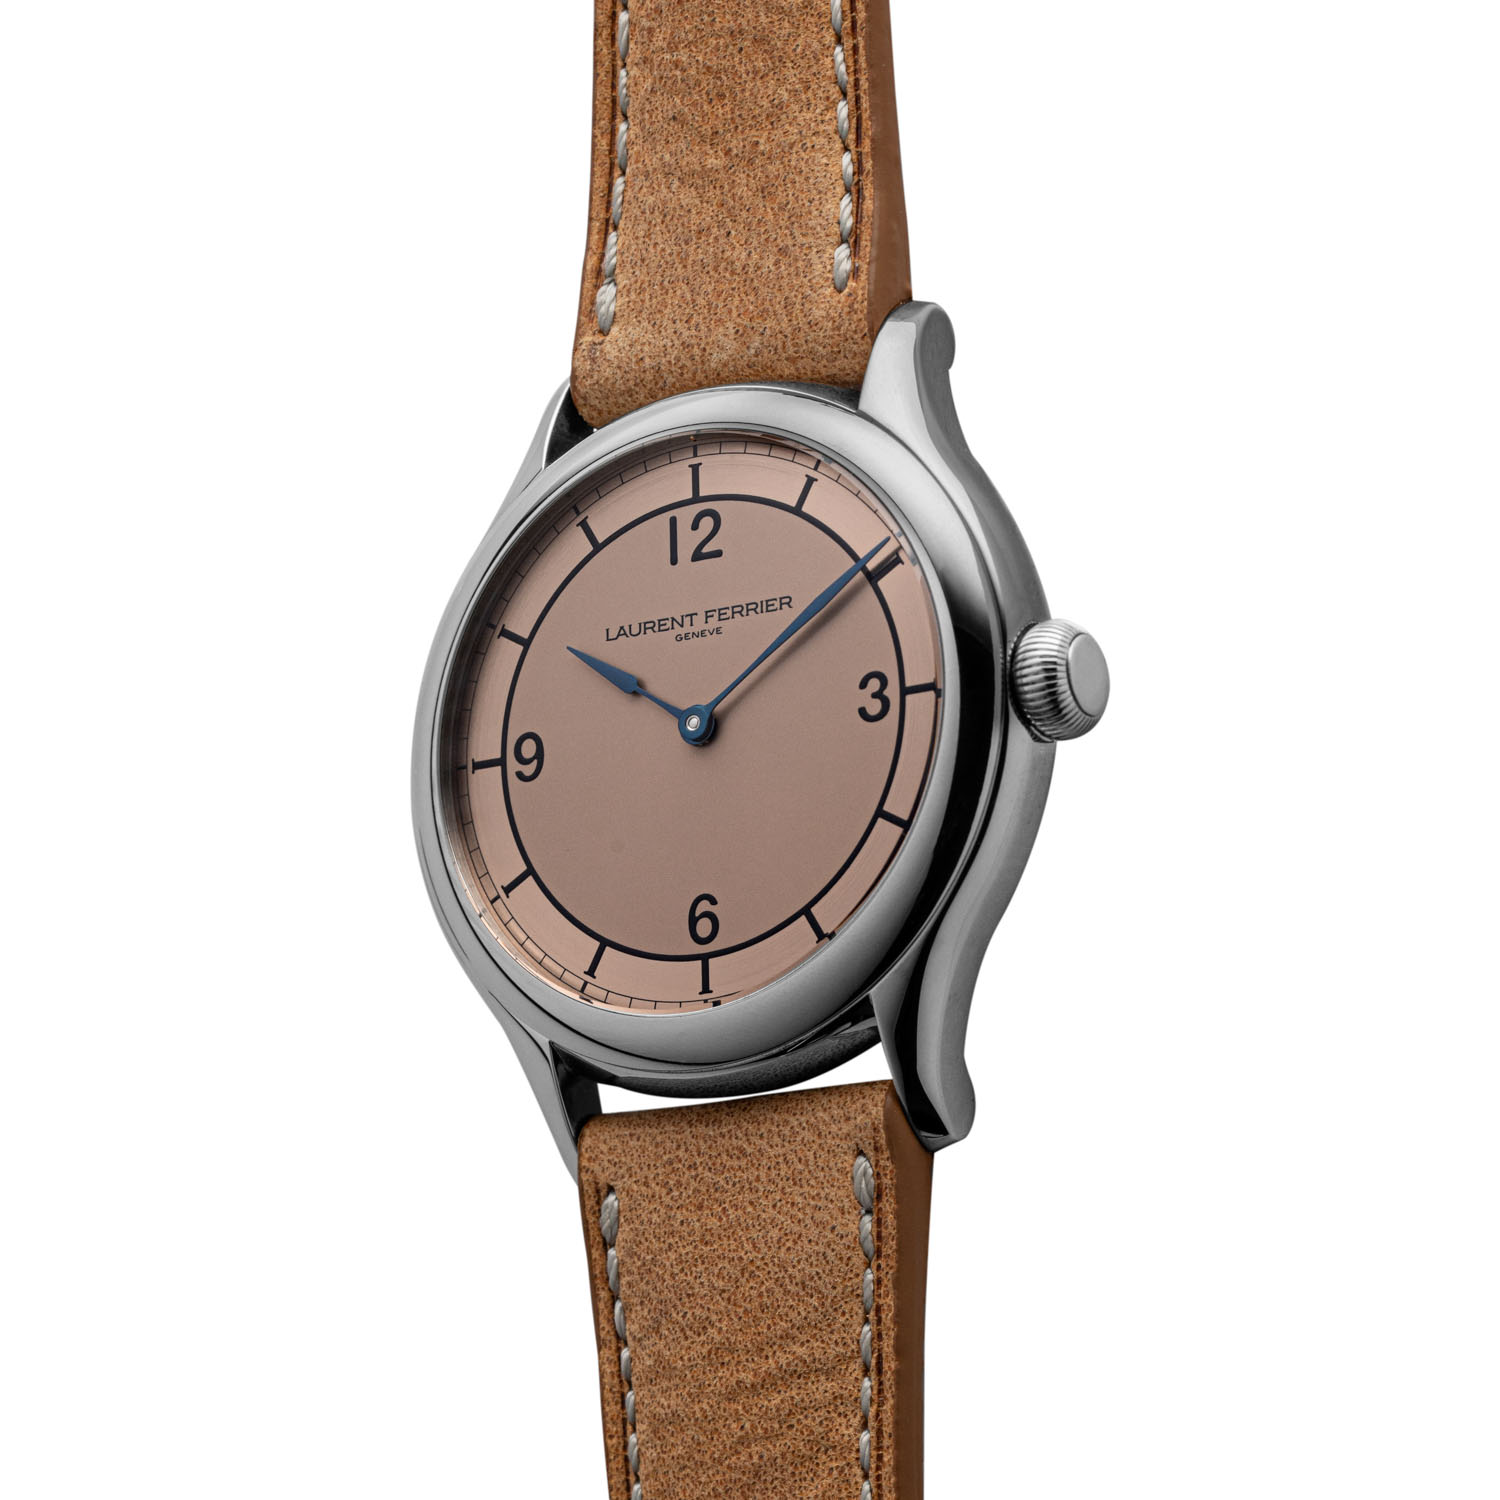 The Laurent Ferrier Steel Galet Micro-Rotor Salmon Dial pièce unique for Revolution (©Revolution)